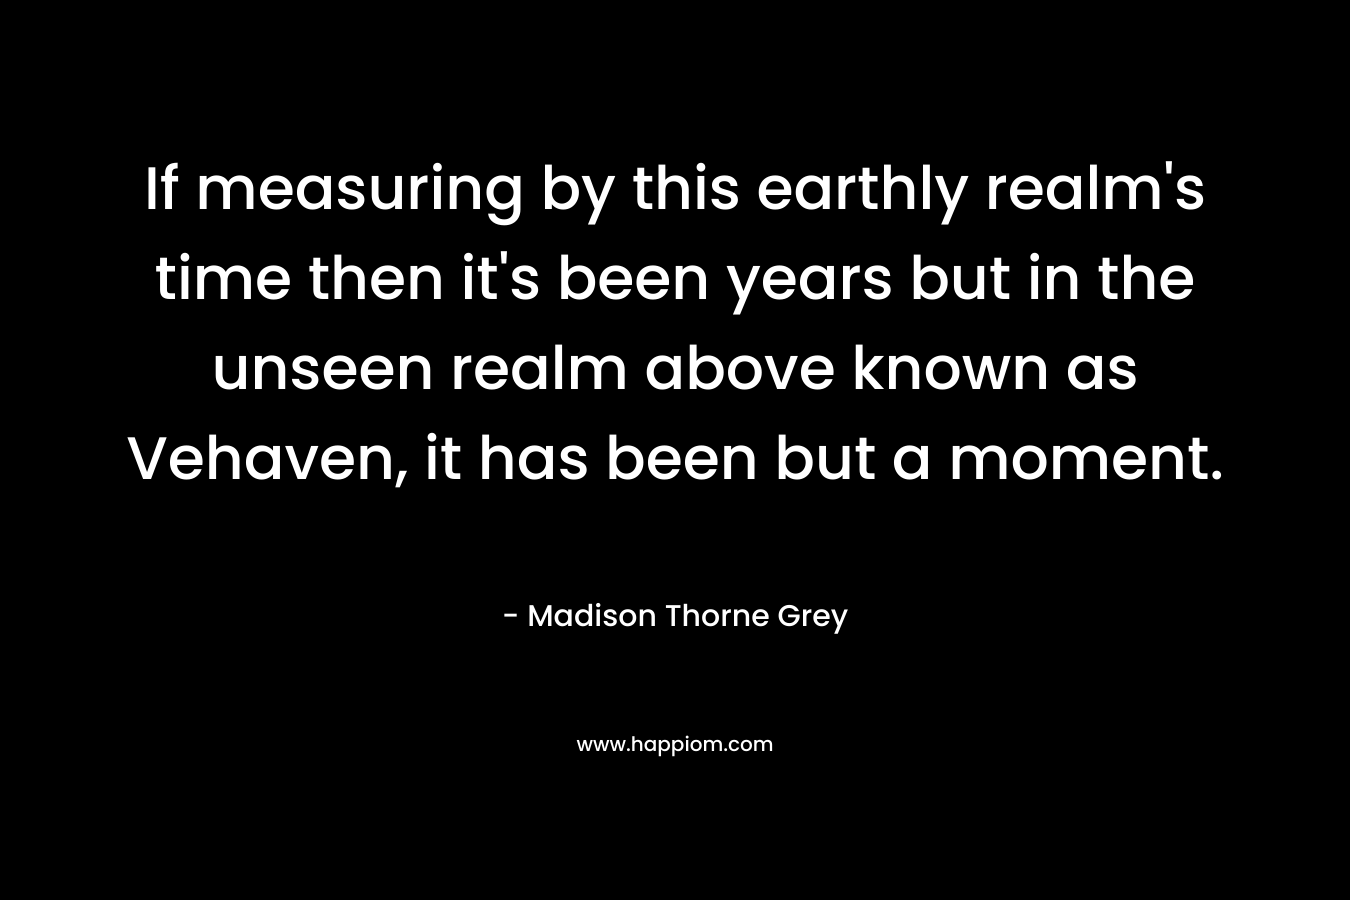 If measuring by this earthly realm’s time then it’s been years but in the unseen realm above known as Vehaven, it has been but a moment. – Madison Thorne Grey